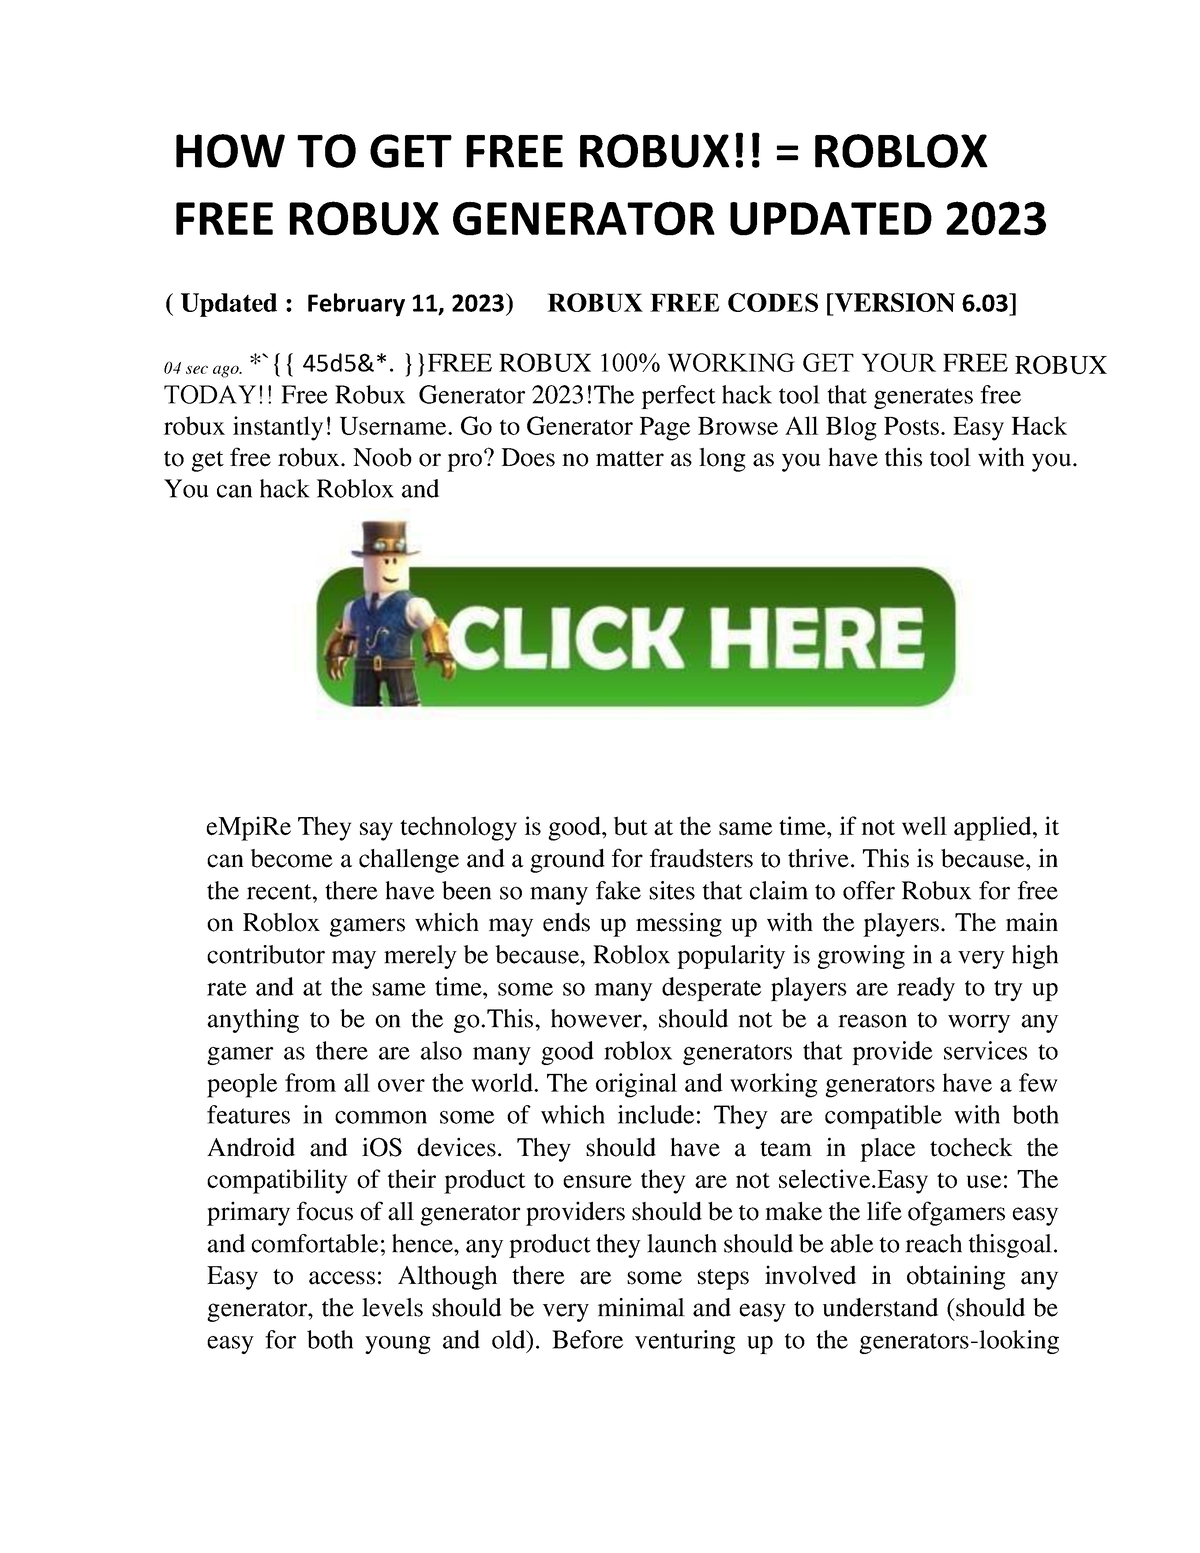 HOW TO GET FREE ROBUX!! = ROBLOX FREE ROBUX GENERATOR UPDATED 2023